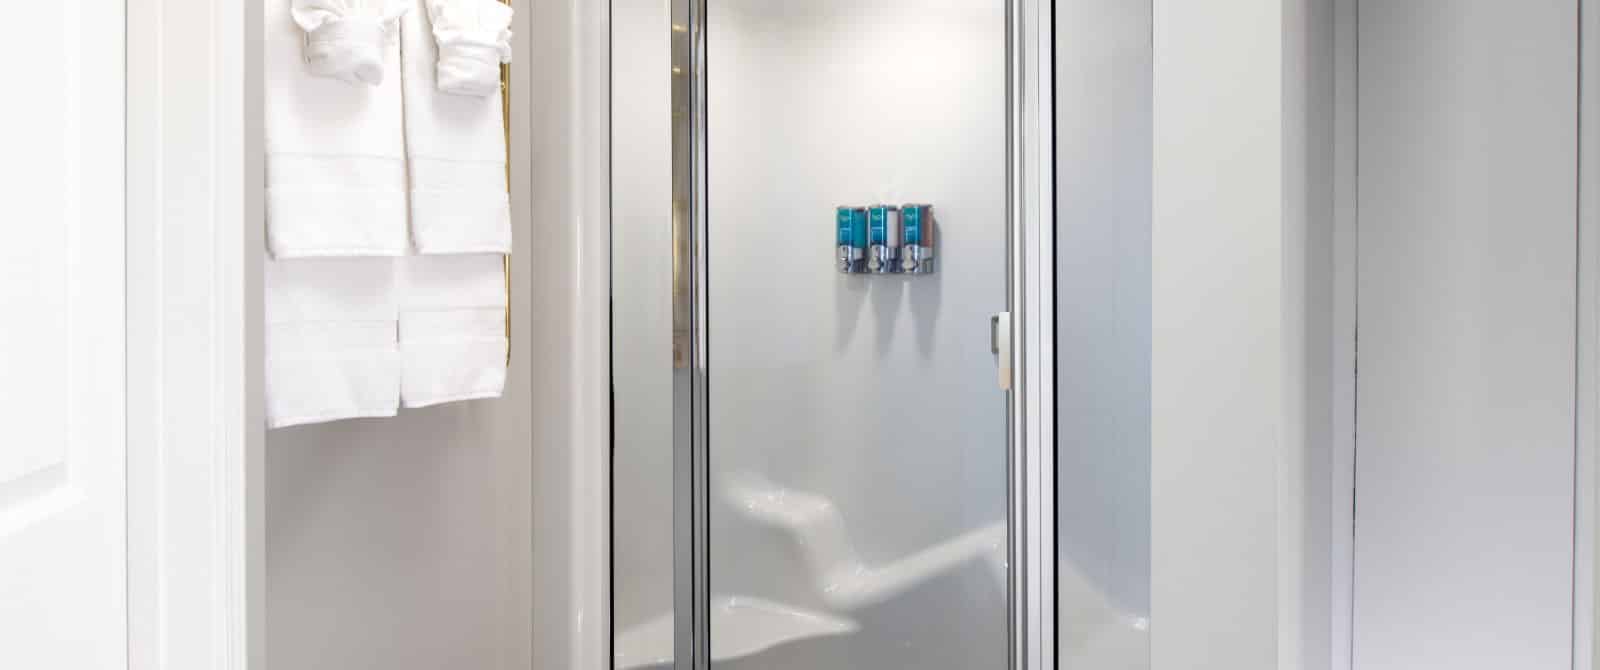 Bathroom with stand up shower and dispensers with shampoo, conditioner, and body soap